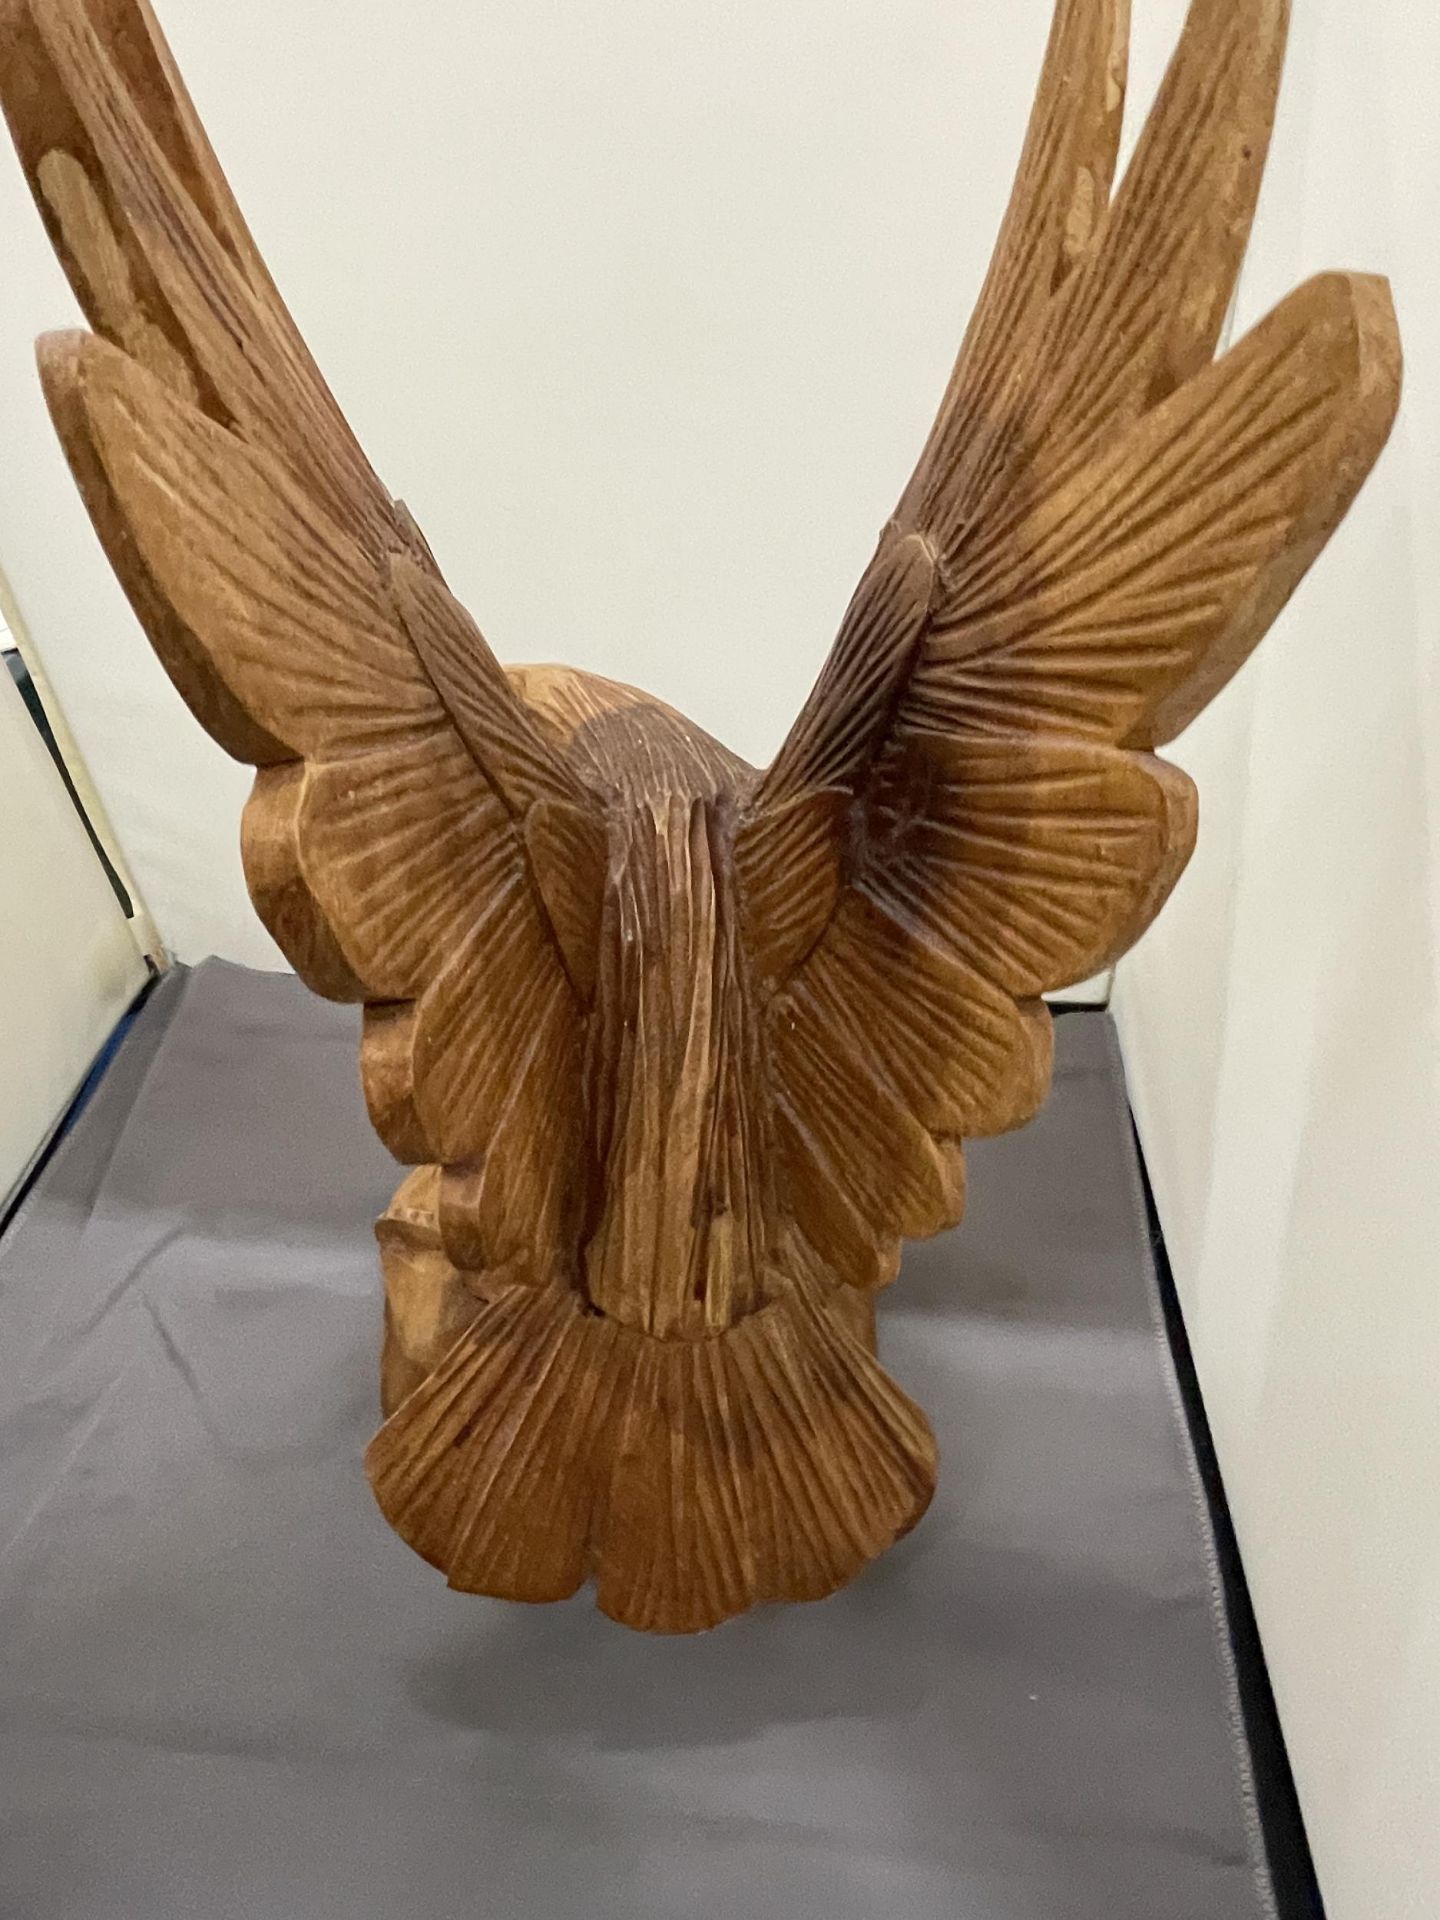 A HAND CARVED WOODEN EAGLE, HEIGHT 37CM - Image 3 of 3